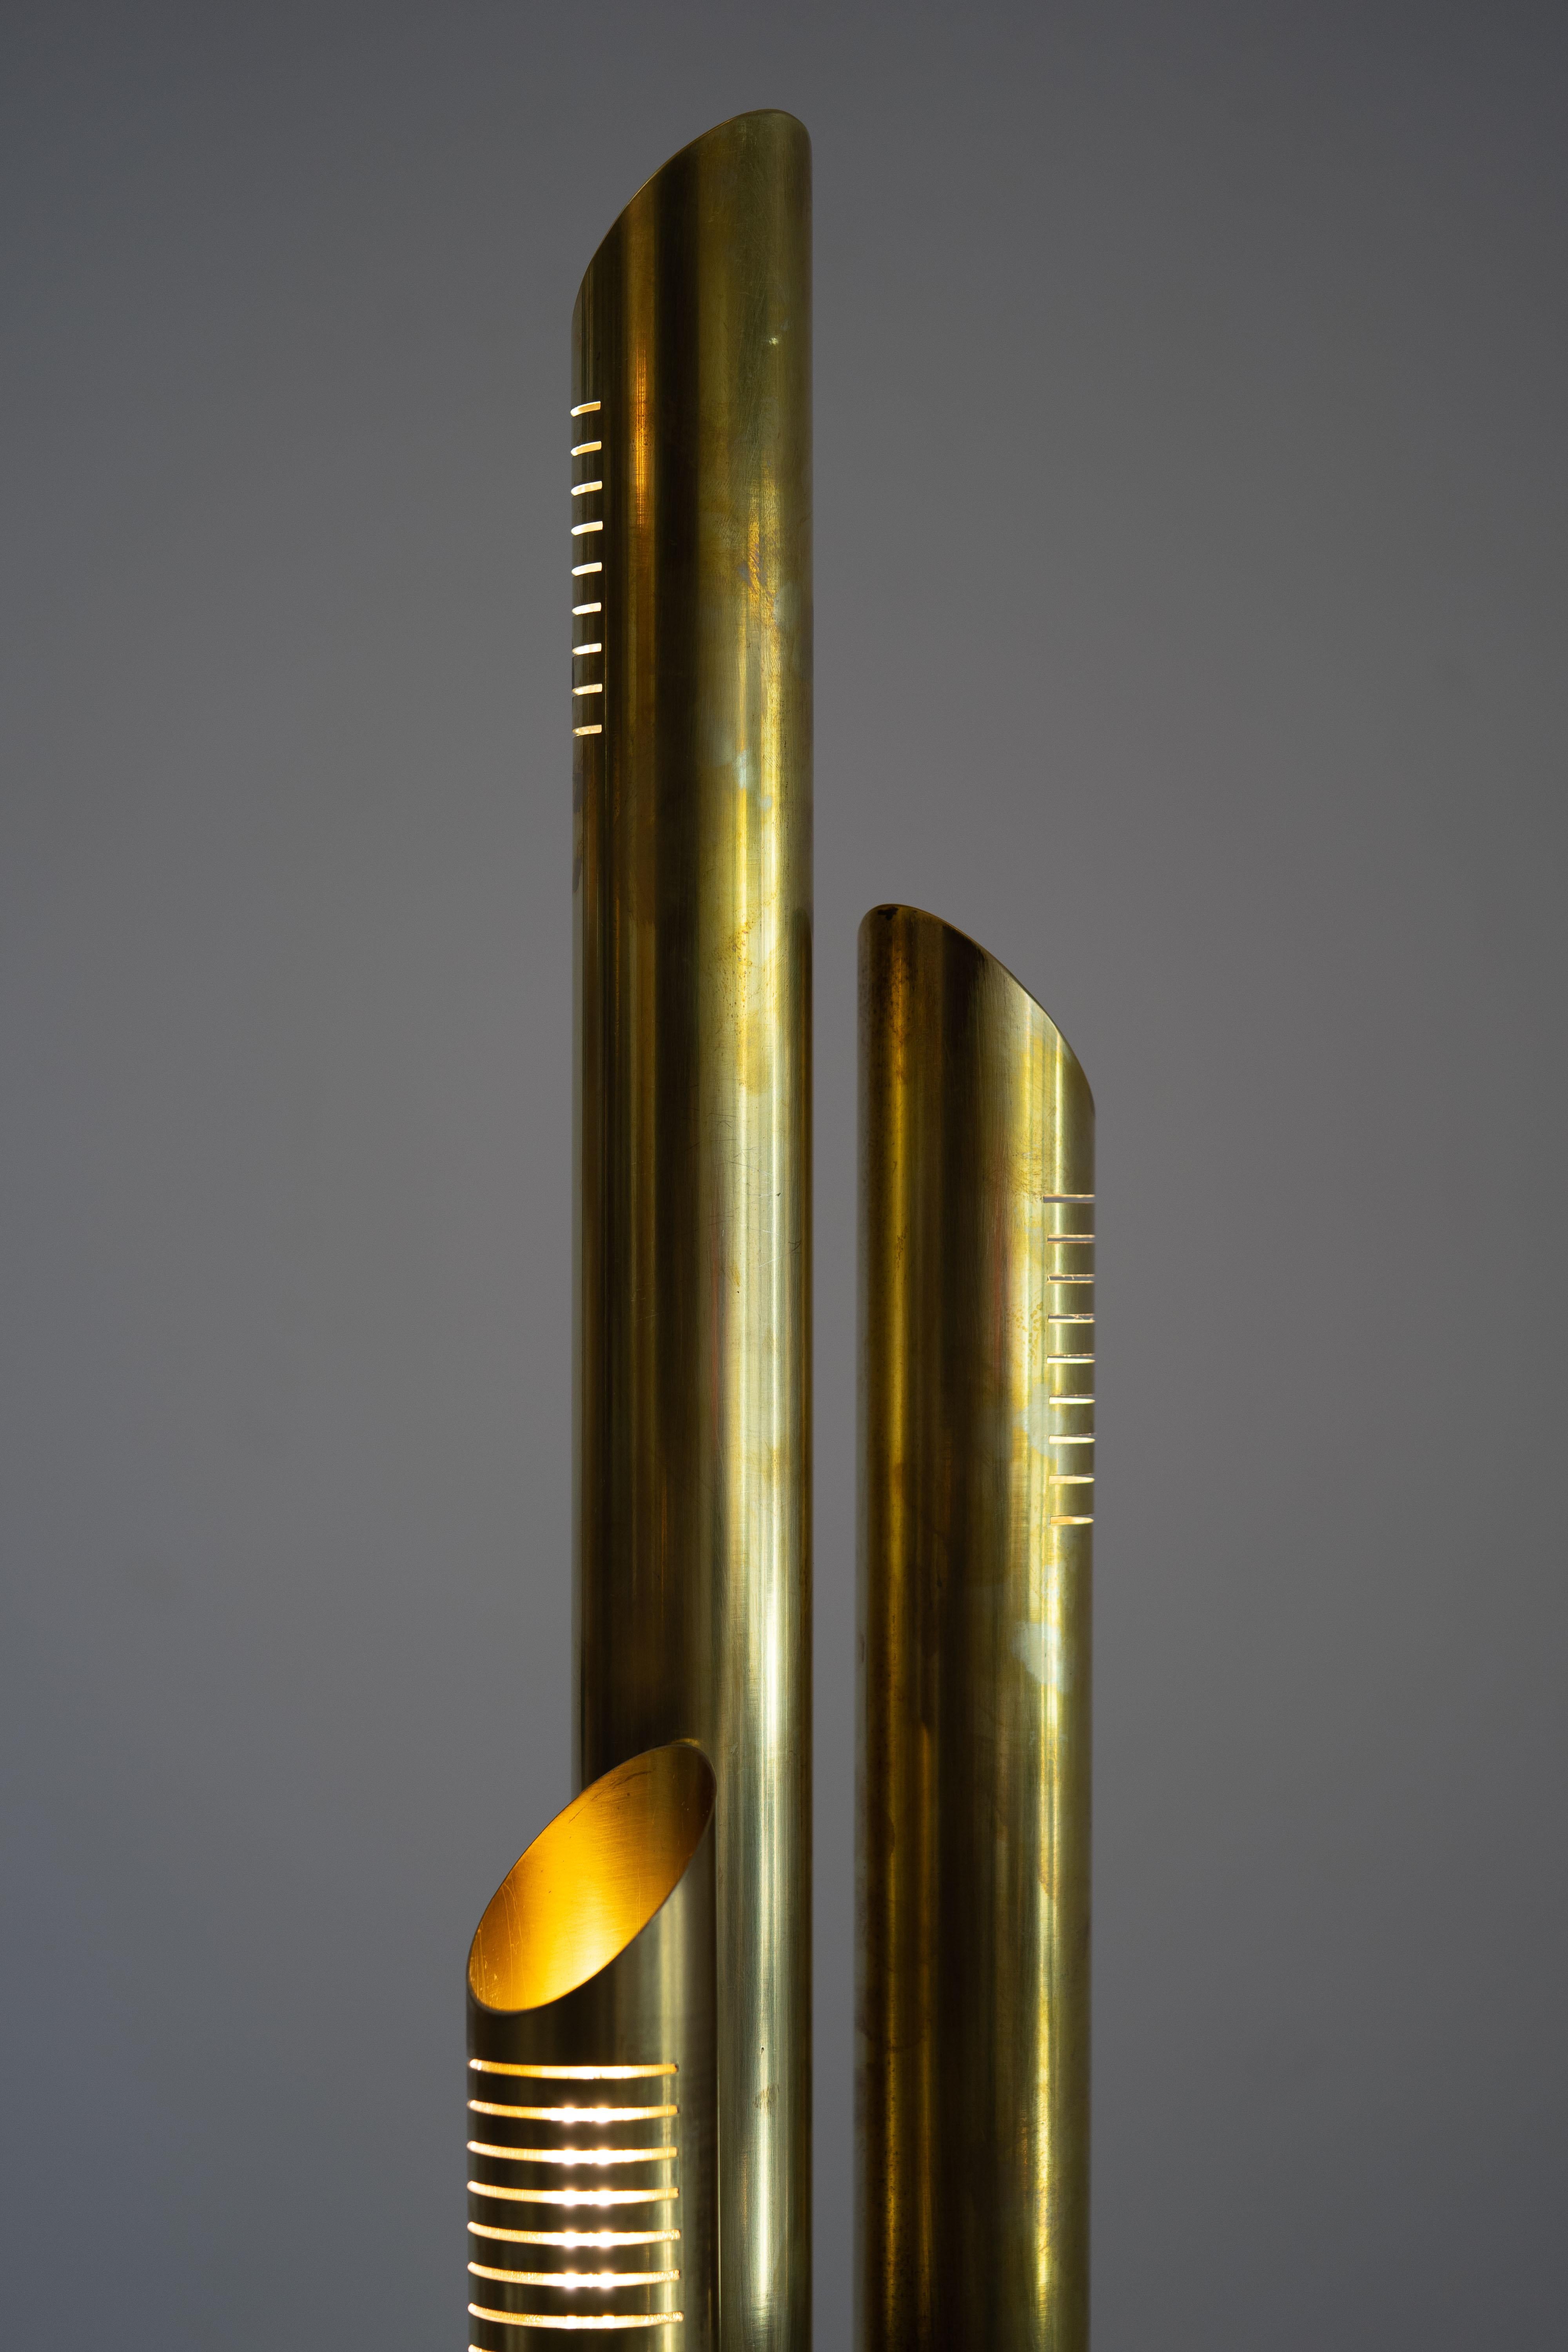 Italian Solid Brass Tube Floor Lamp Designed by R. Fontana, circa 1970 In Good Condition For Sale In Los Angeles, CA